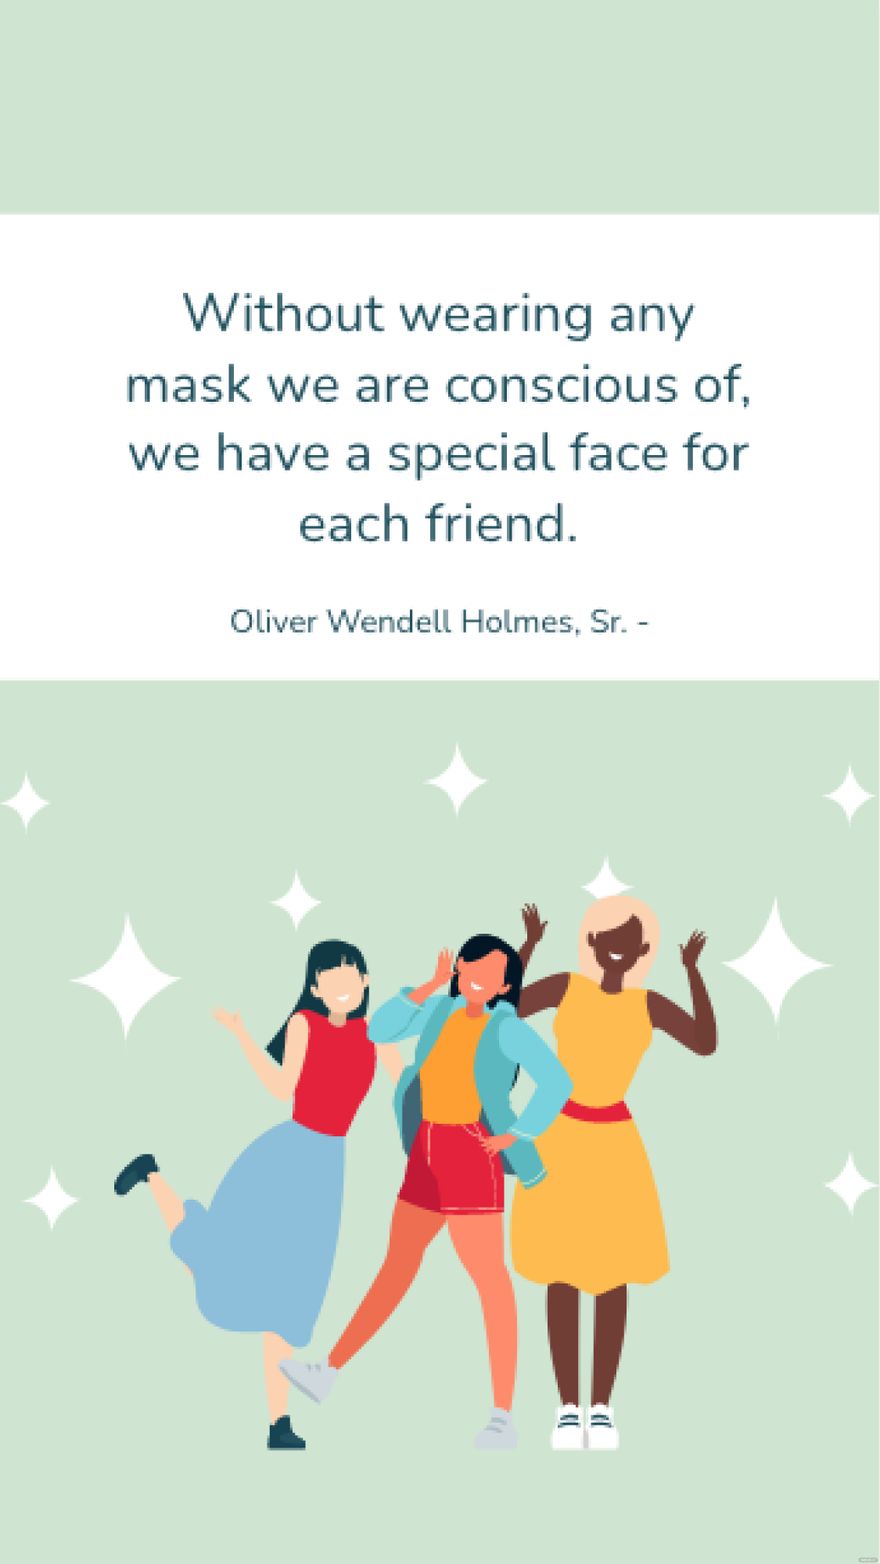 Oliver Wendell Holmes, Sr. - Without wearing any mask we are conscious of, we have a special face for each friend.